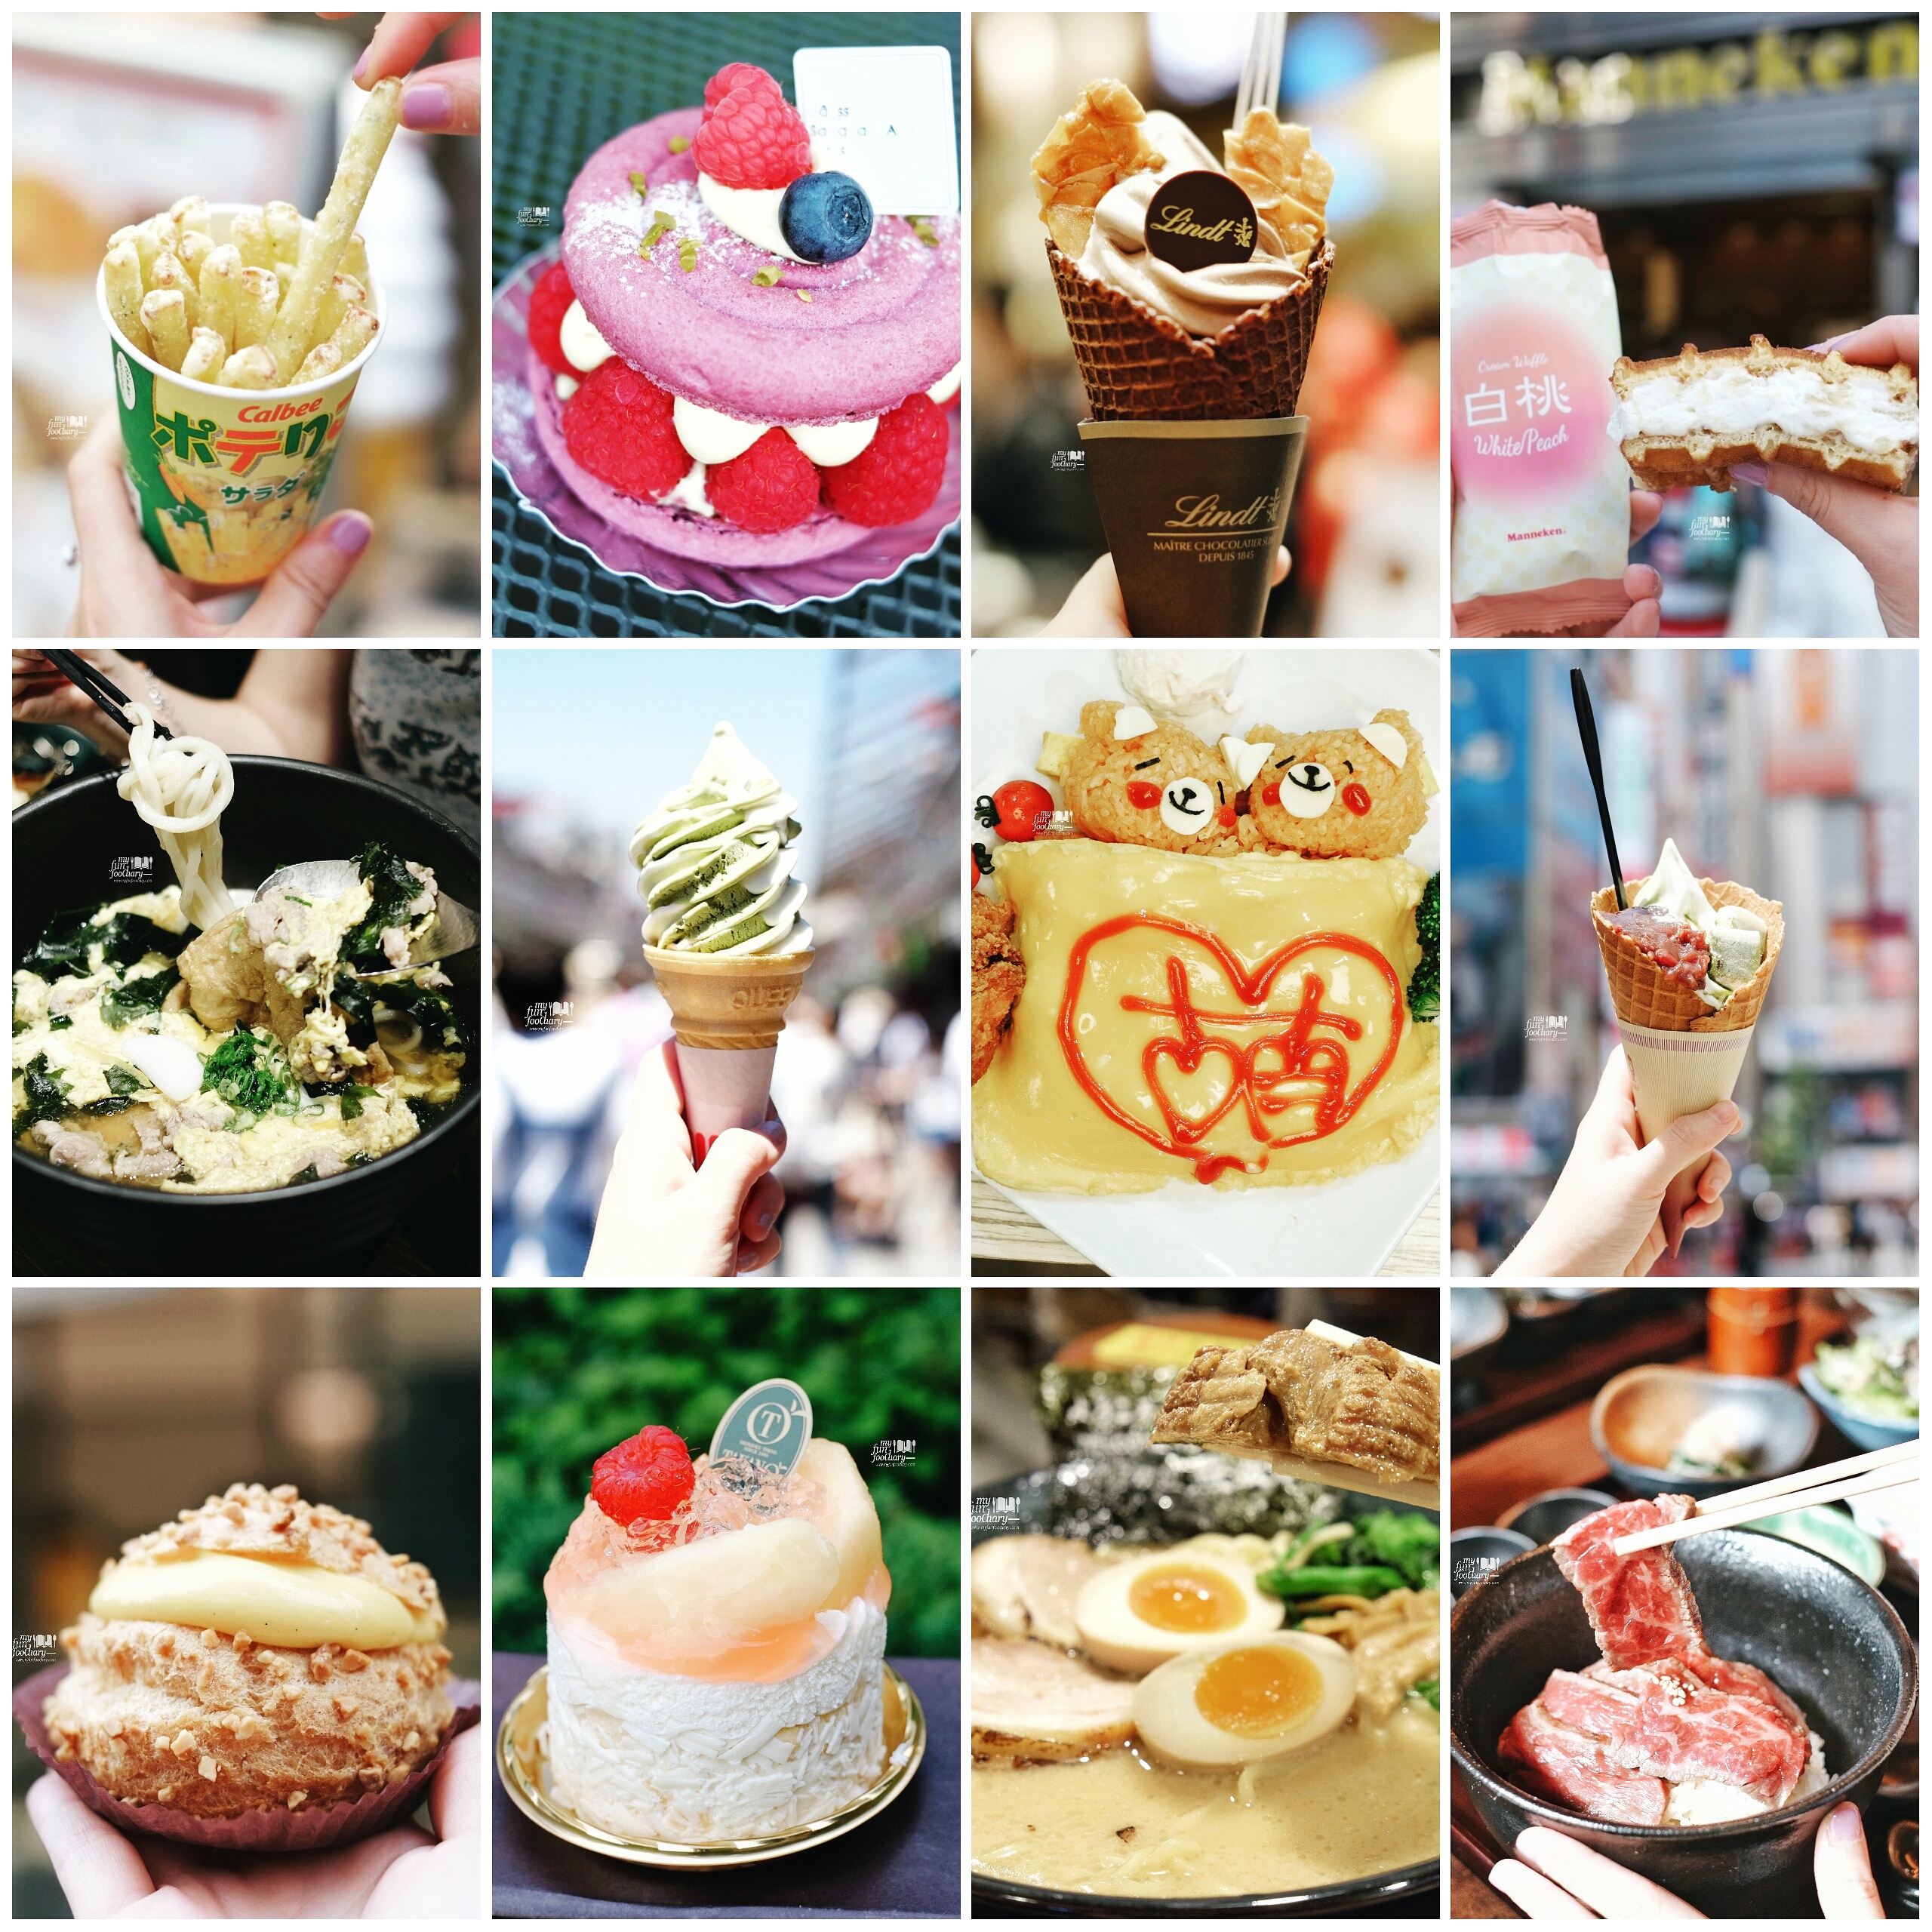 27 Food and Dessert Recommendation in Tokyo - Japan by Myfunfoodiary